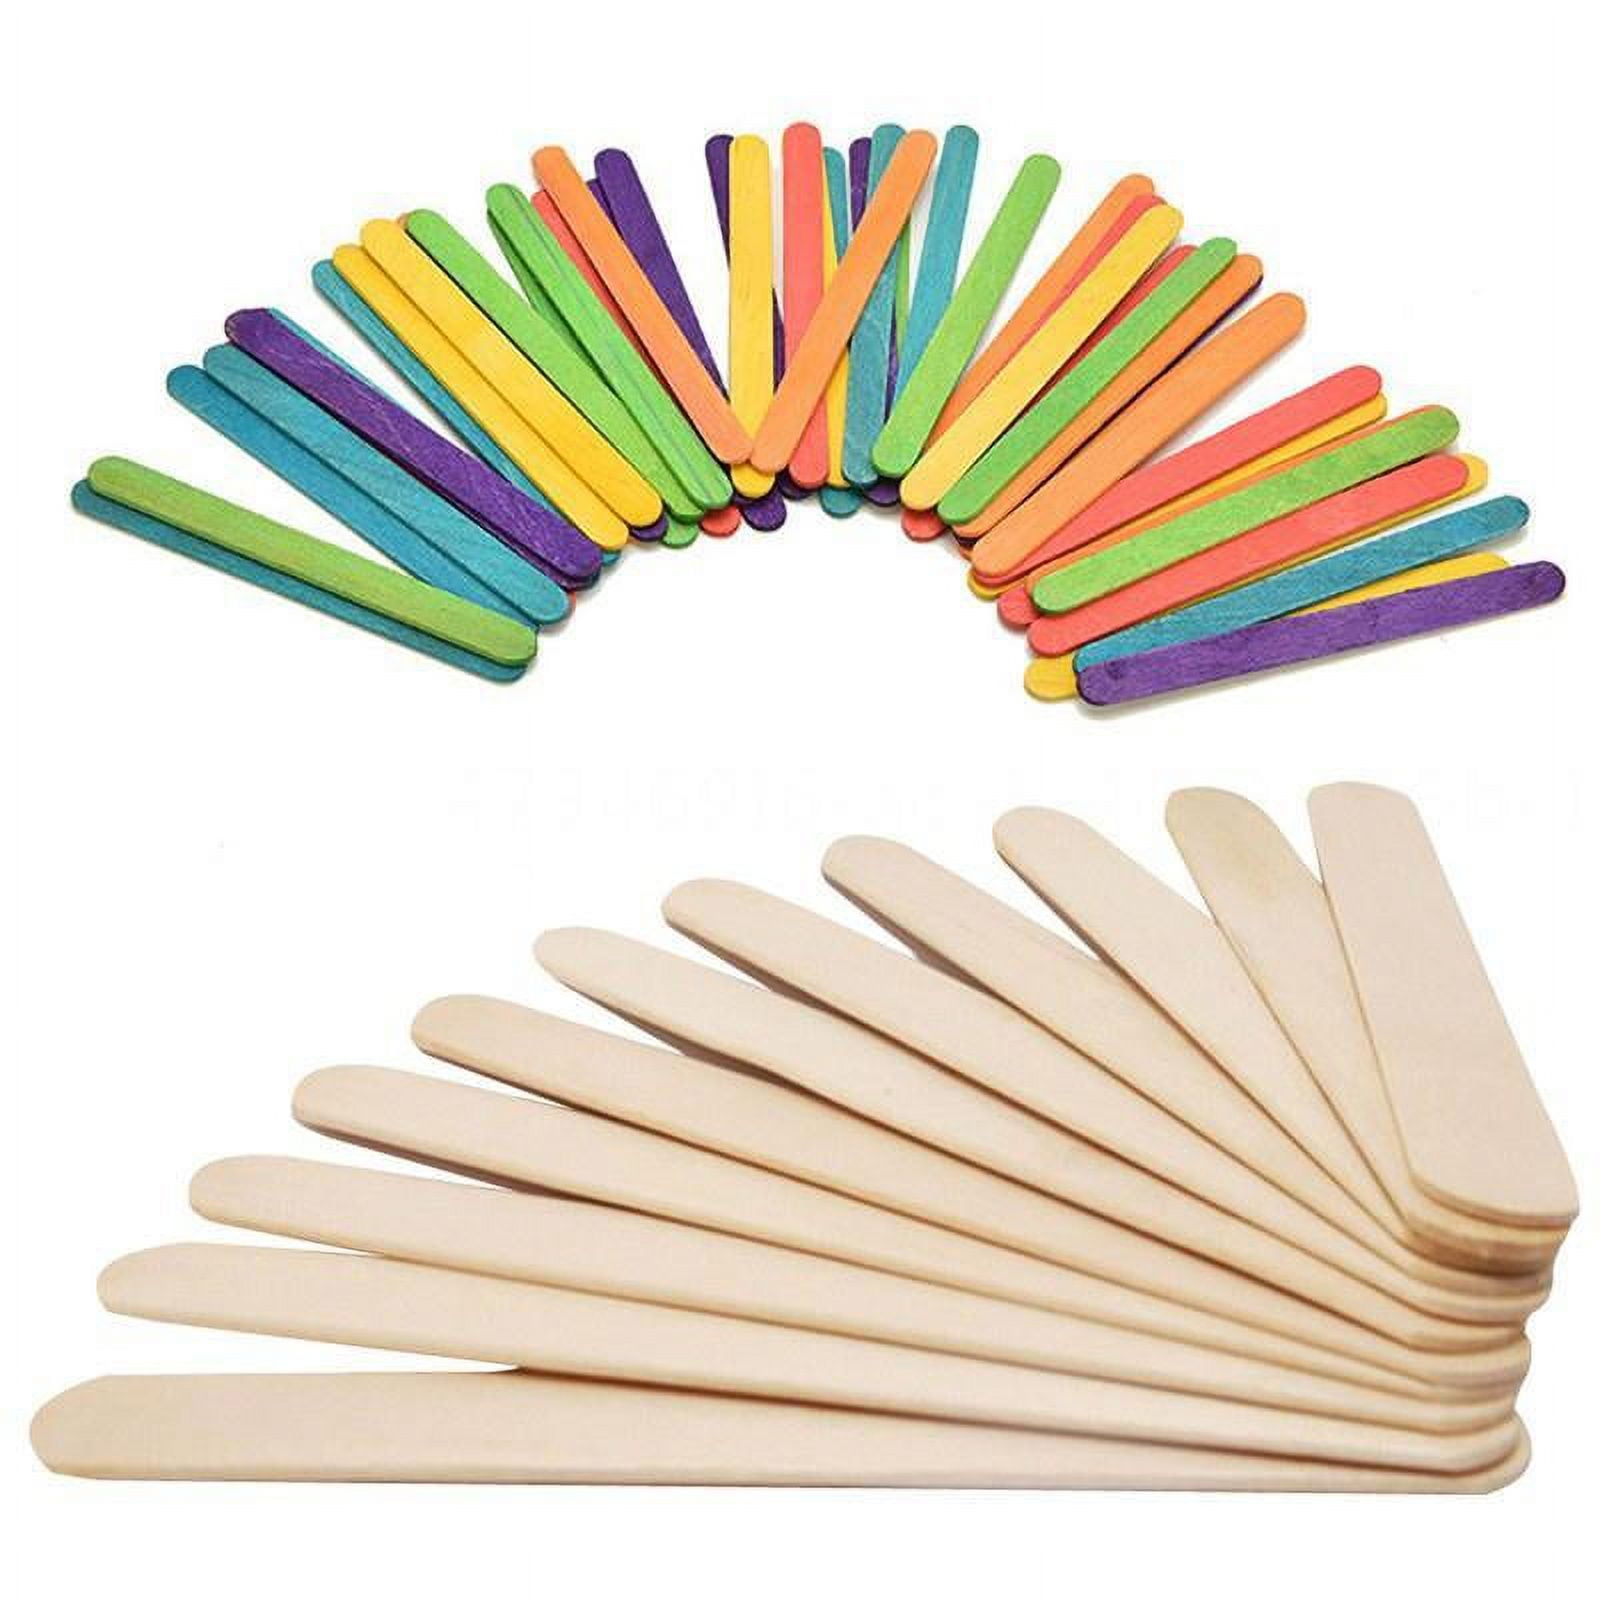 Novelty Wide Ice Cream Sticks Case of 112 bands/50ct